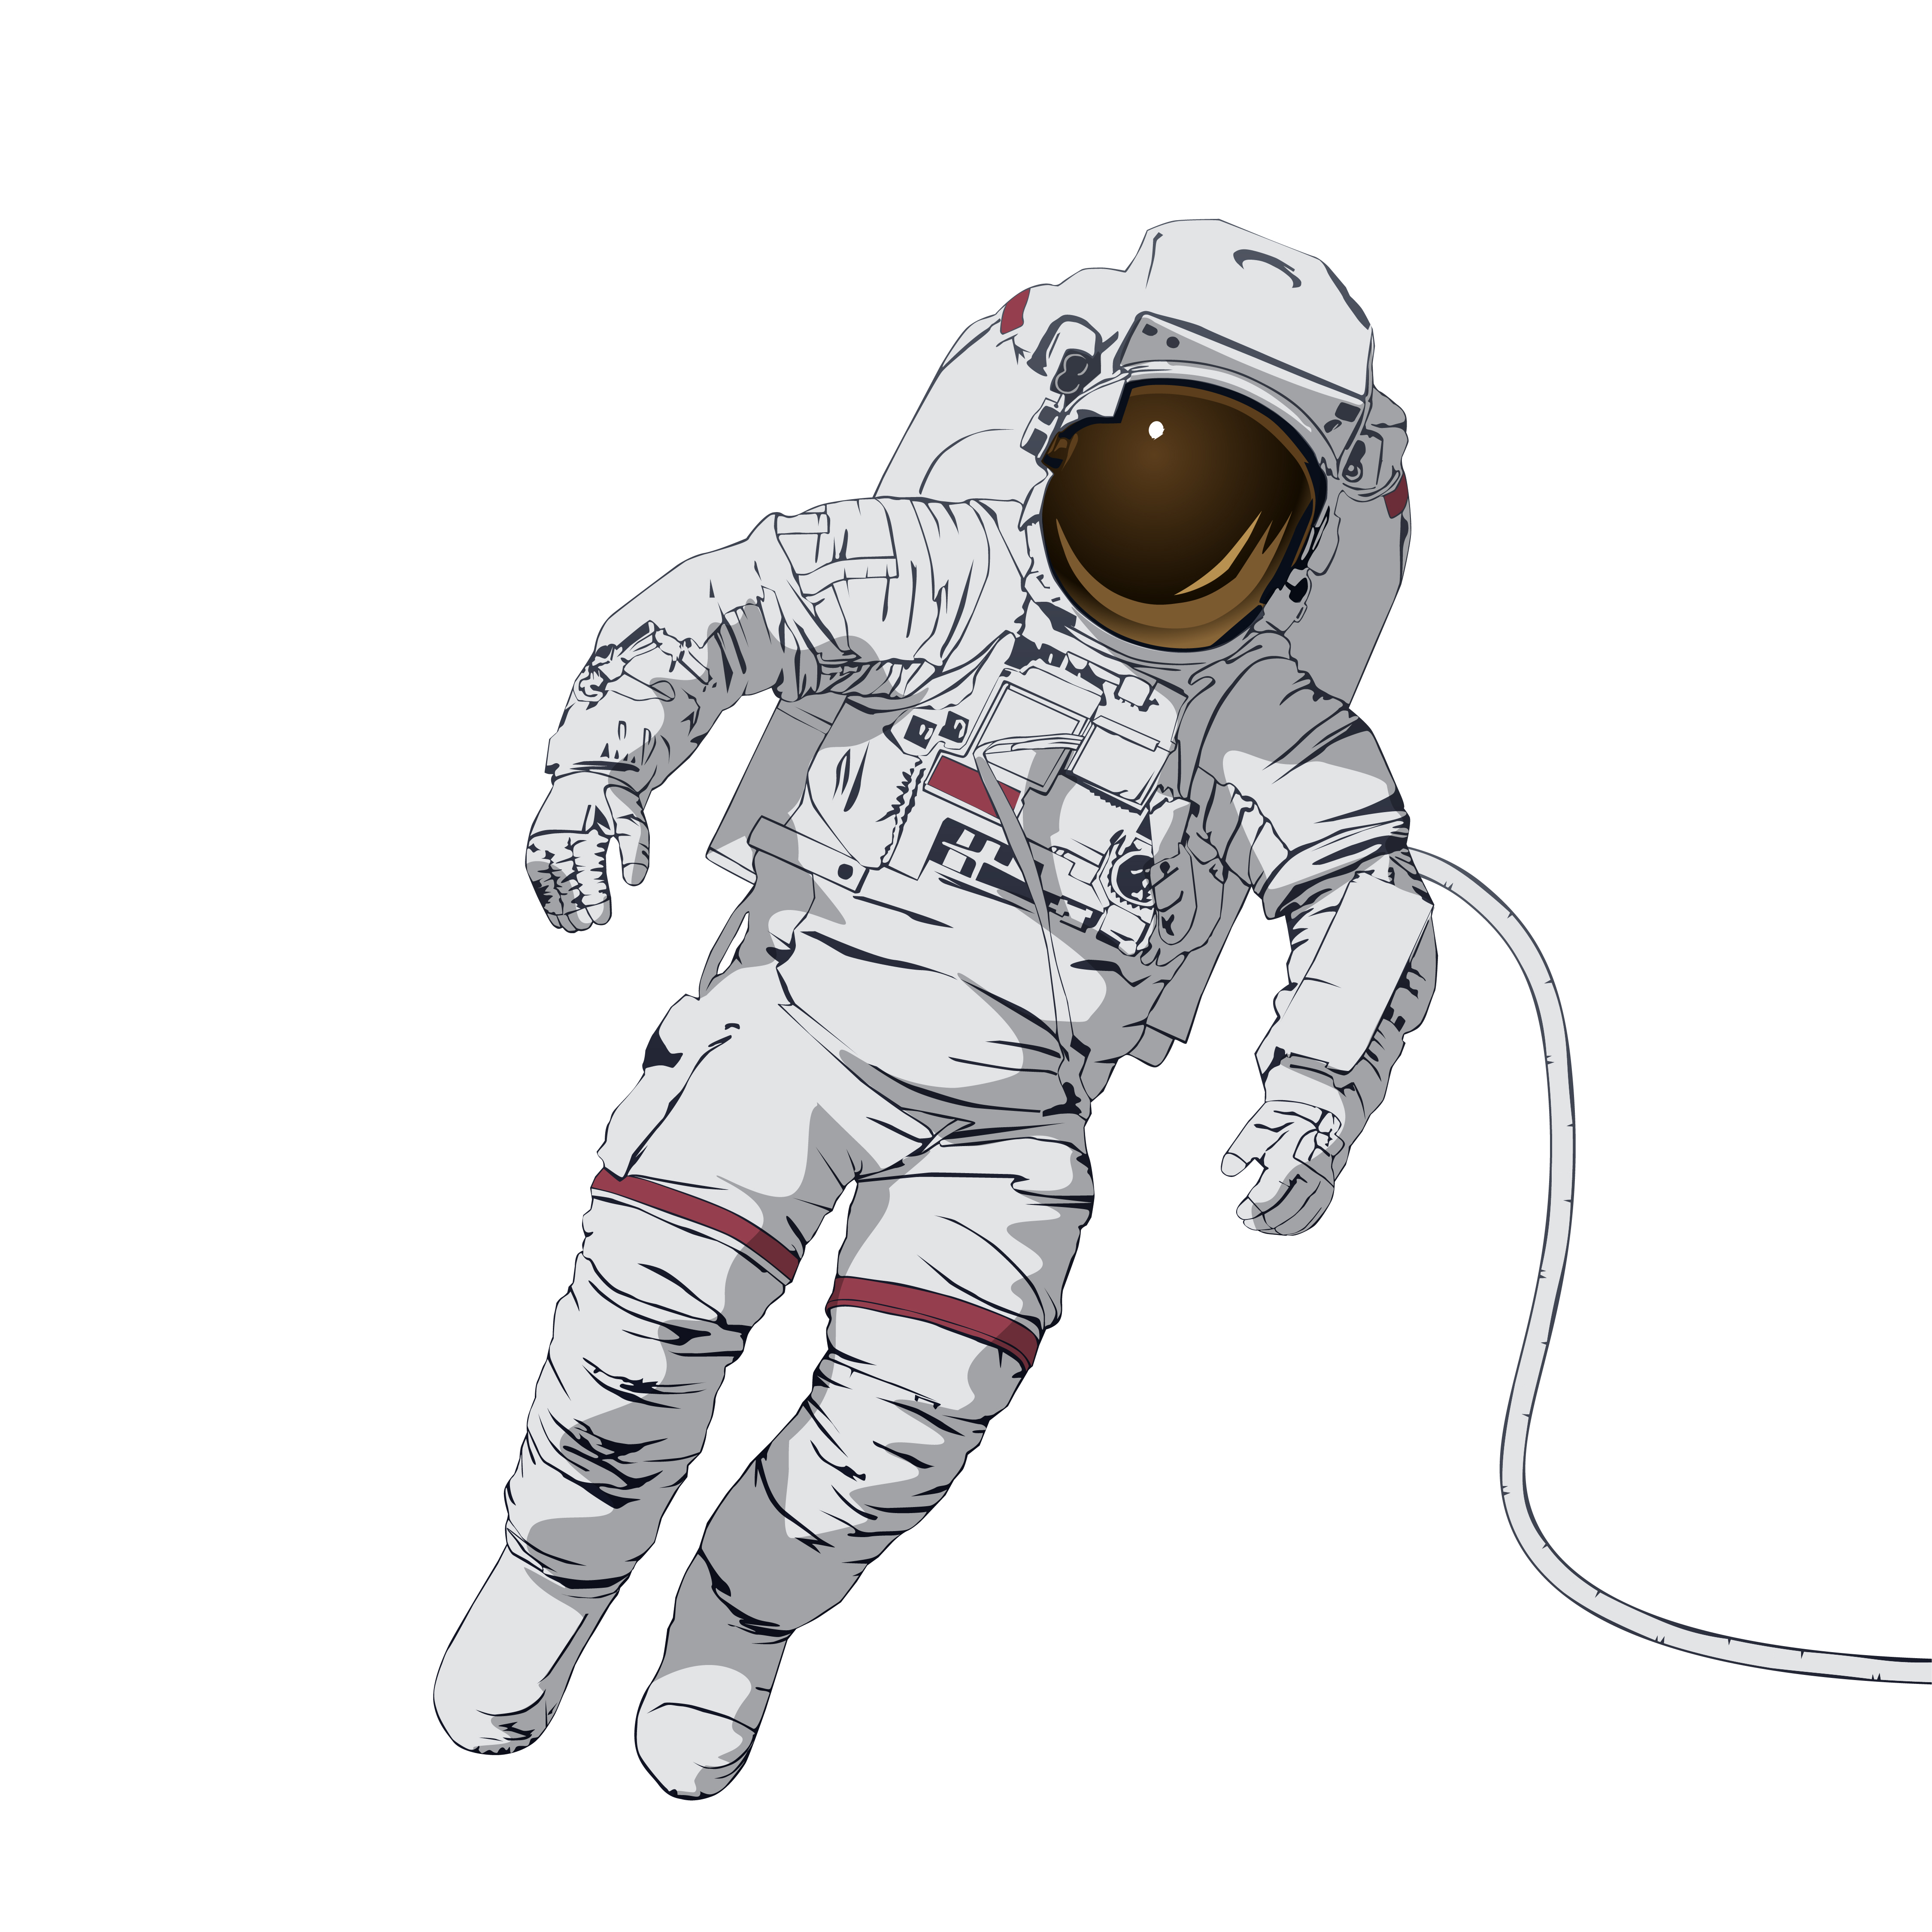 Astronaut_in_space